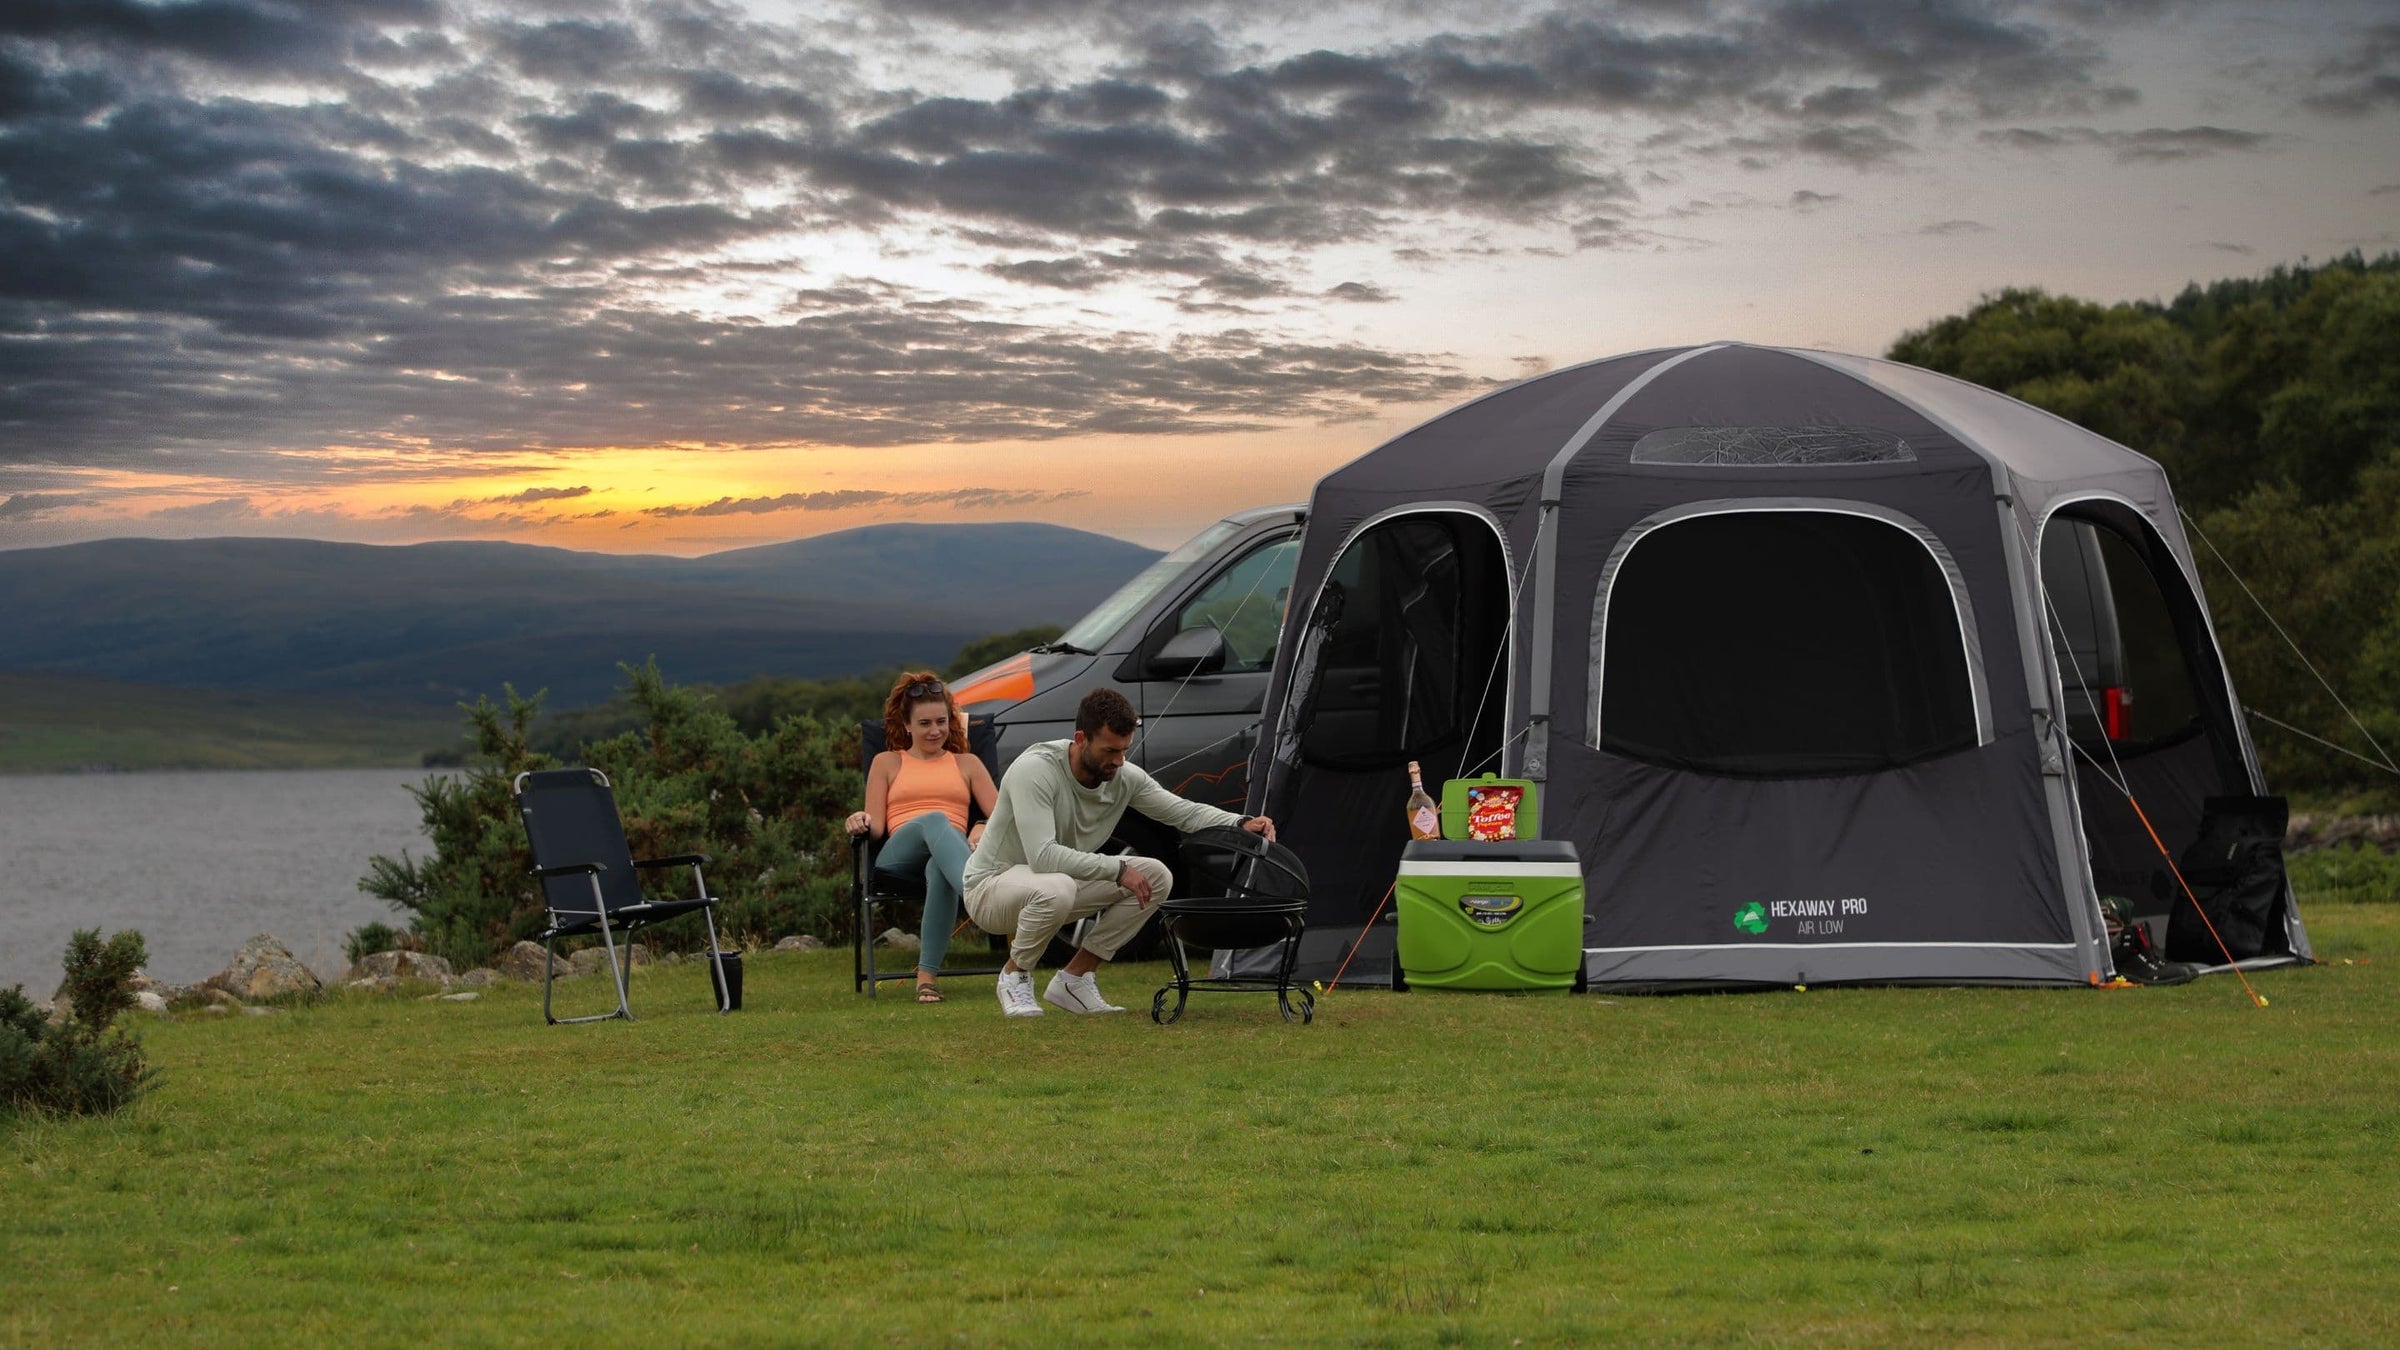 Low and Mid Size VW Campervan Awnings from Vango, Outdoor Revolution and Kampa